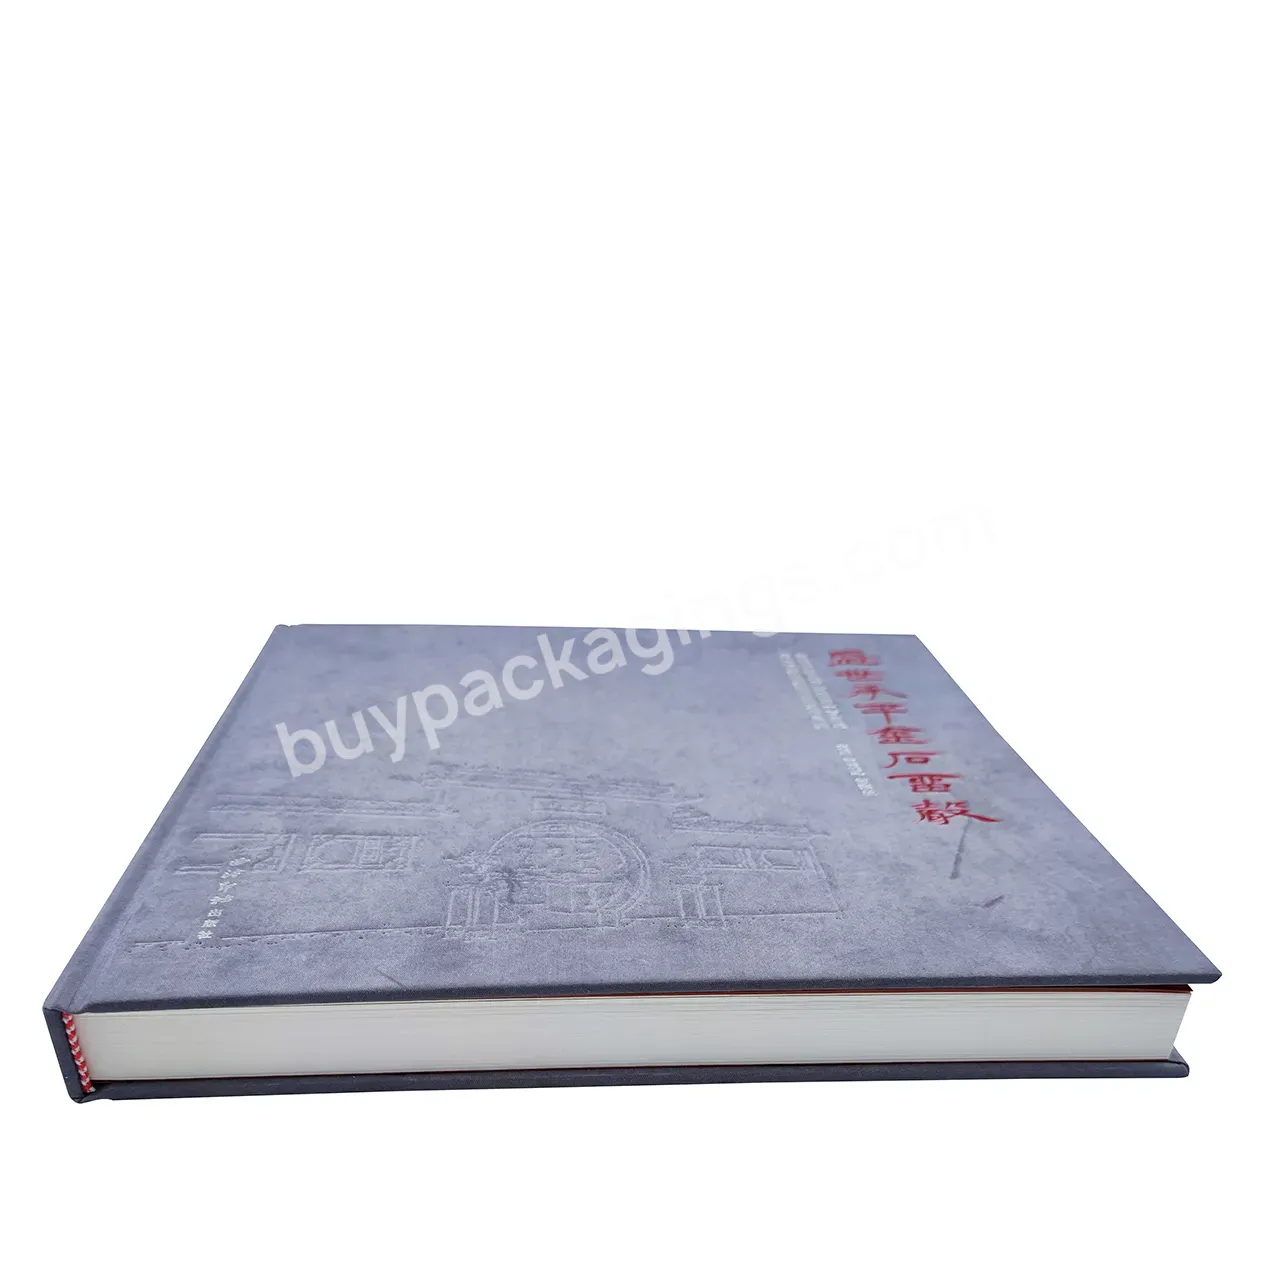 Imee Texture Cloth Cover Hardcover Book Full Colour Printing With Goil Foil Embossed Cover Book Printing Books Printing Services - Buy Textured Cloth Fabric Linen Hardcover Coffee Table Photo Book Printing With Embossed Photo,High Quality Cheap Hardc